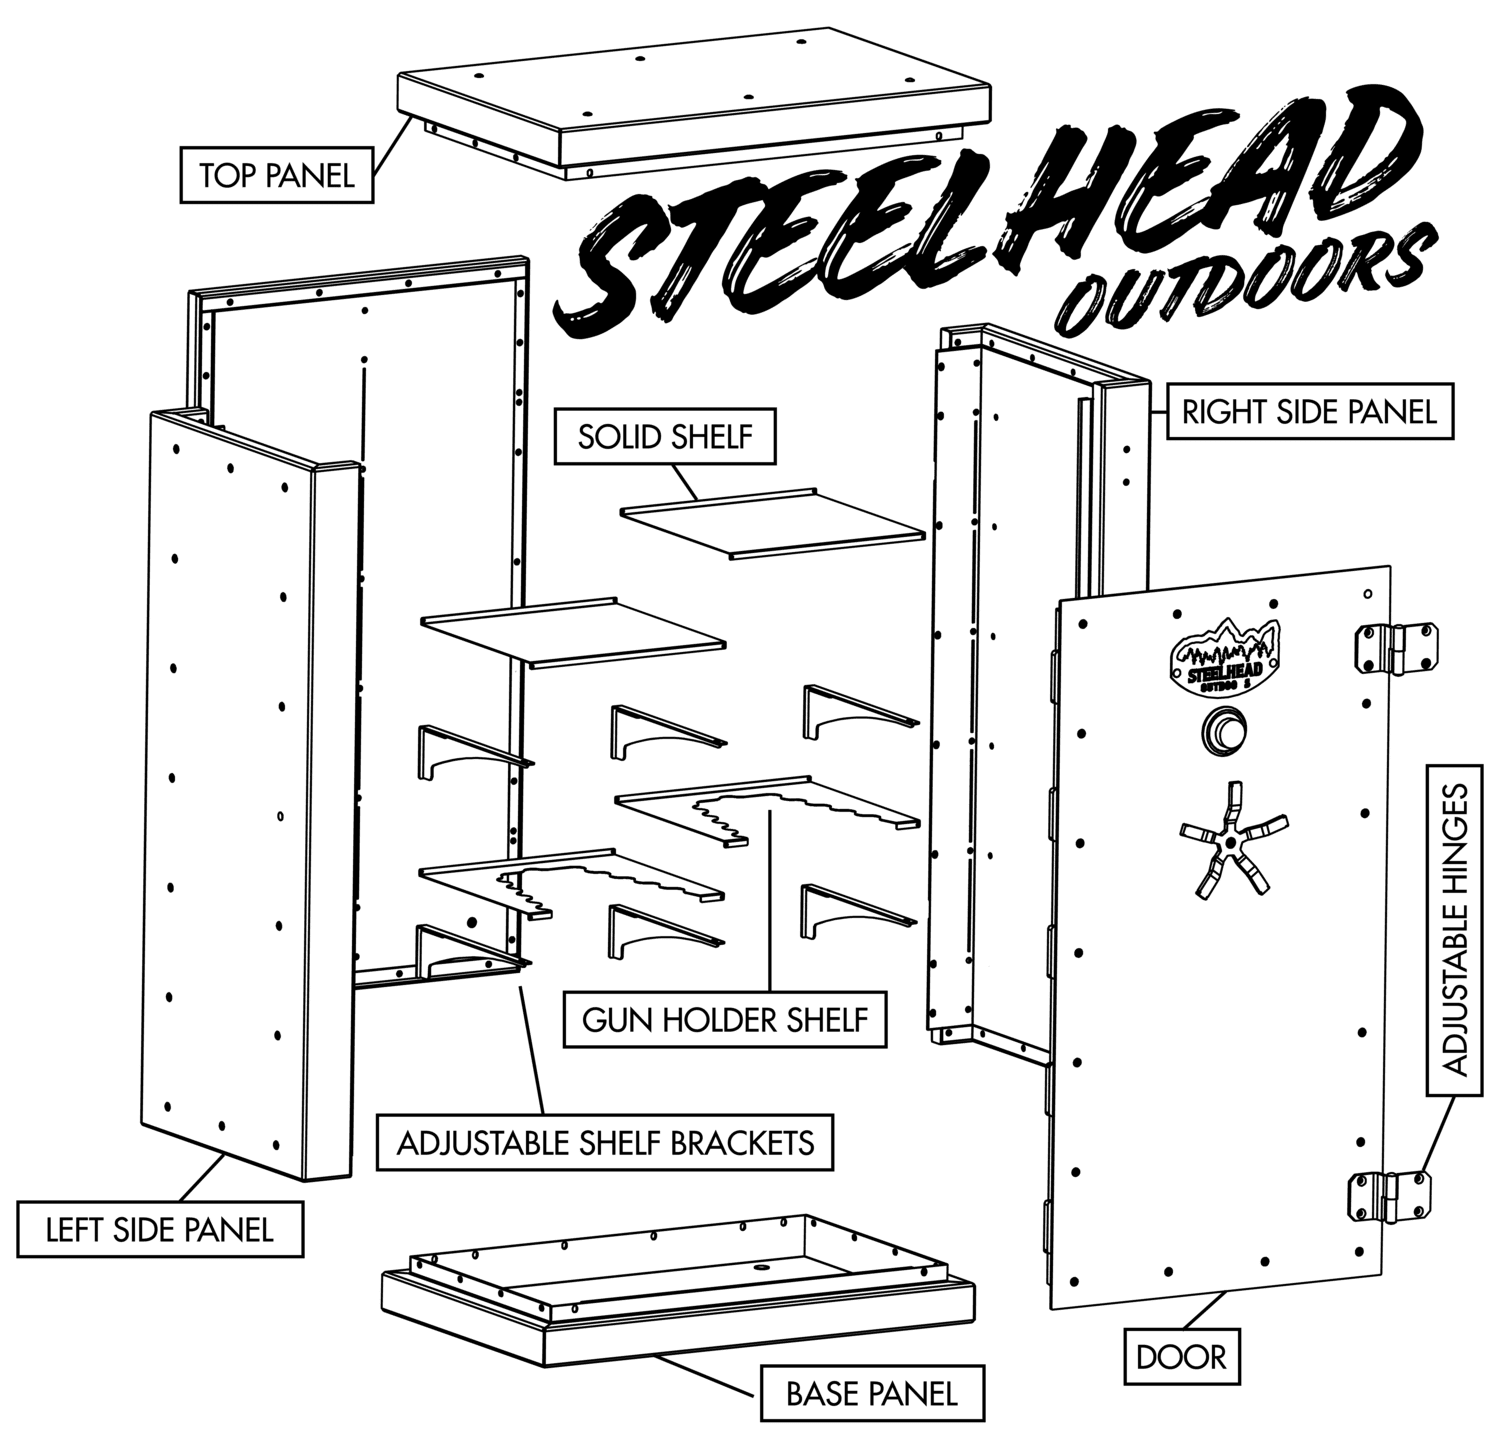 Steelhead Outdoors gun safe diagram with labeled pieces